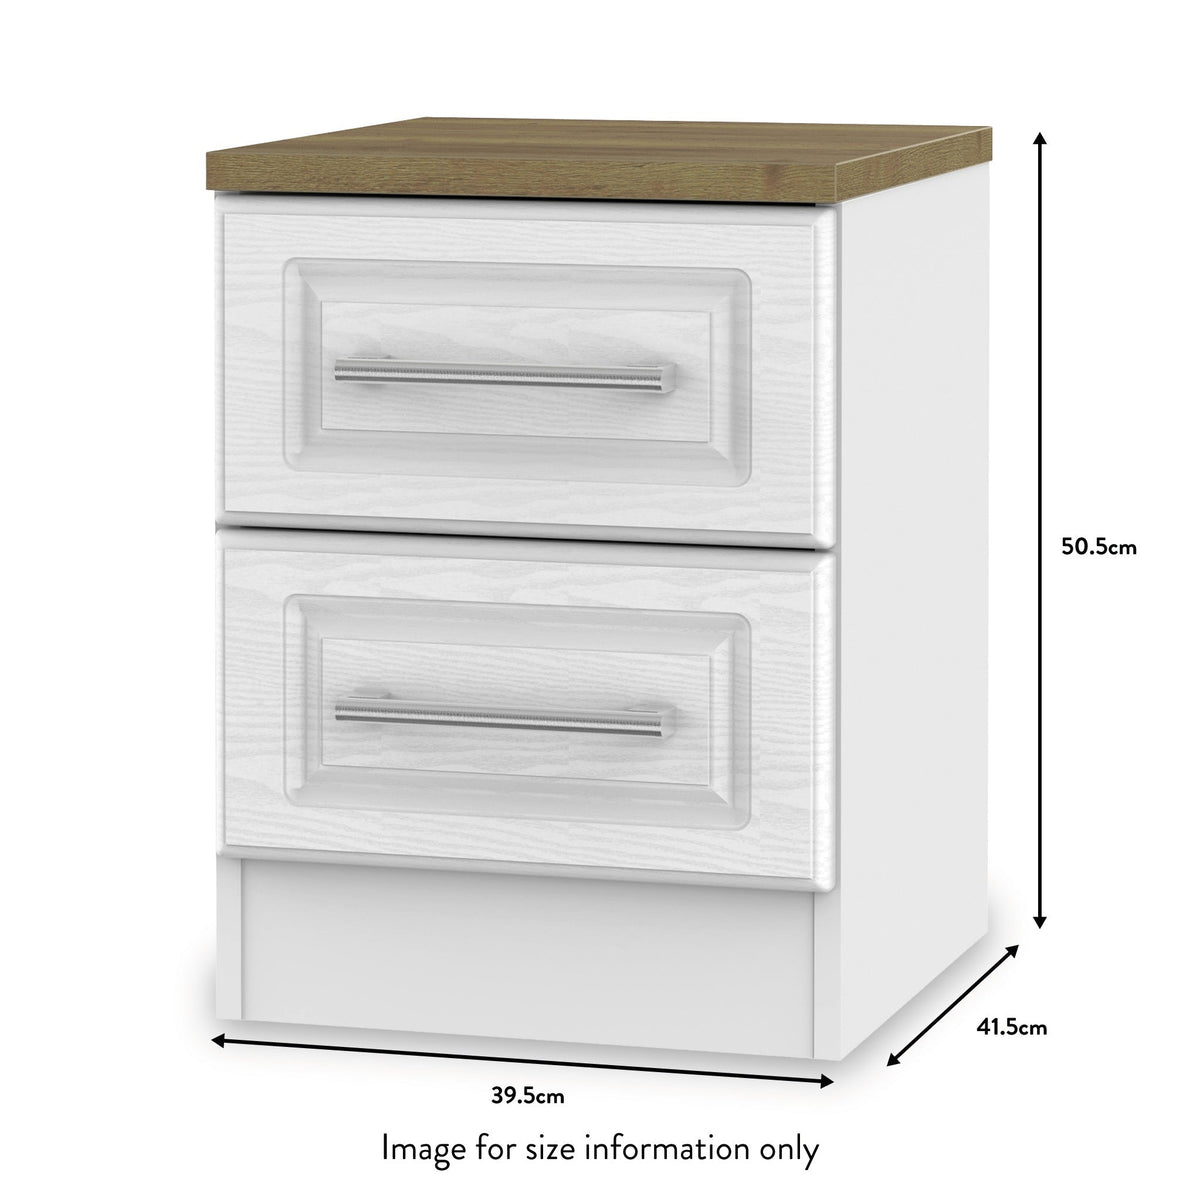 Talland White 2 Drawer Bedside Cabinet from Roseland size